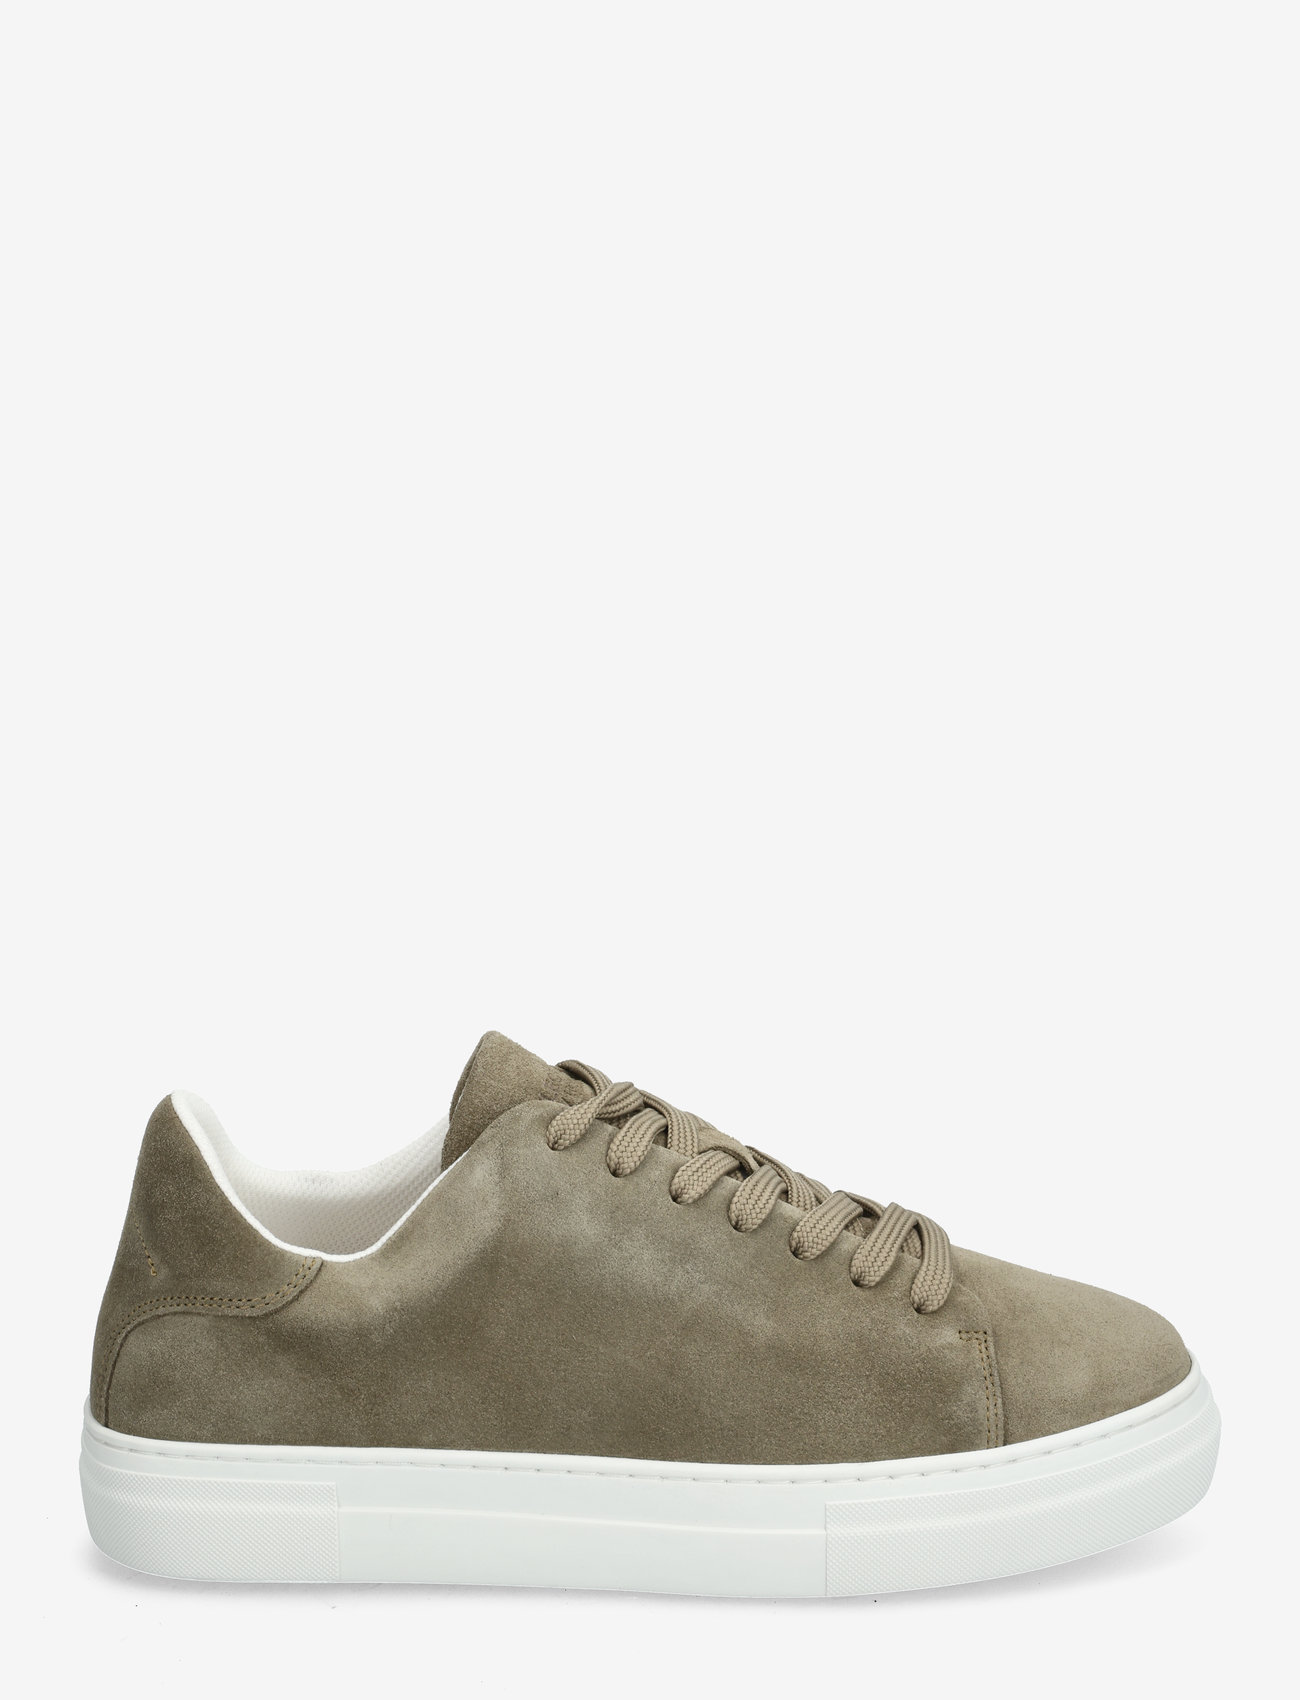 Selected Homme - SLHDAVID CHUNKY CLEAN SUEDE TRAINER B - lav ankel - grape leaf - 1